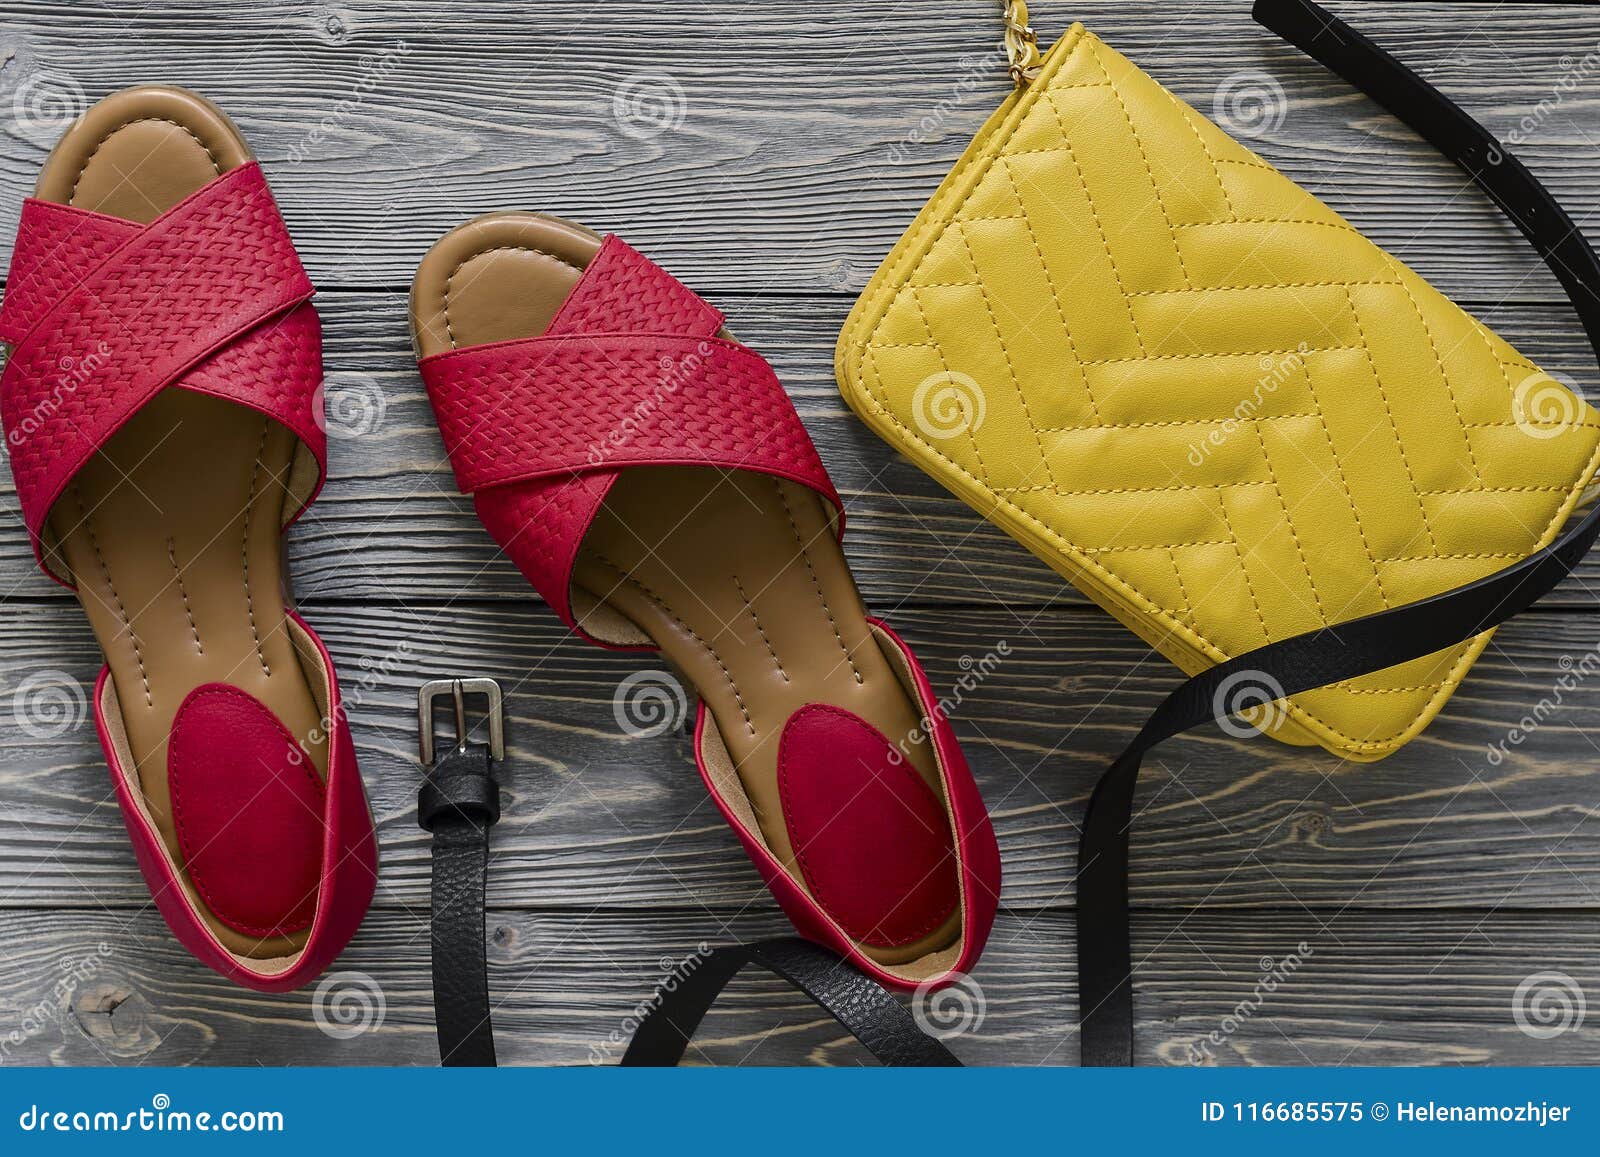 Womens Leather Shoes and Accessories Red Flat Sandals, Yellow H Stock ...